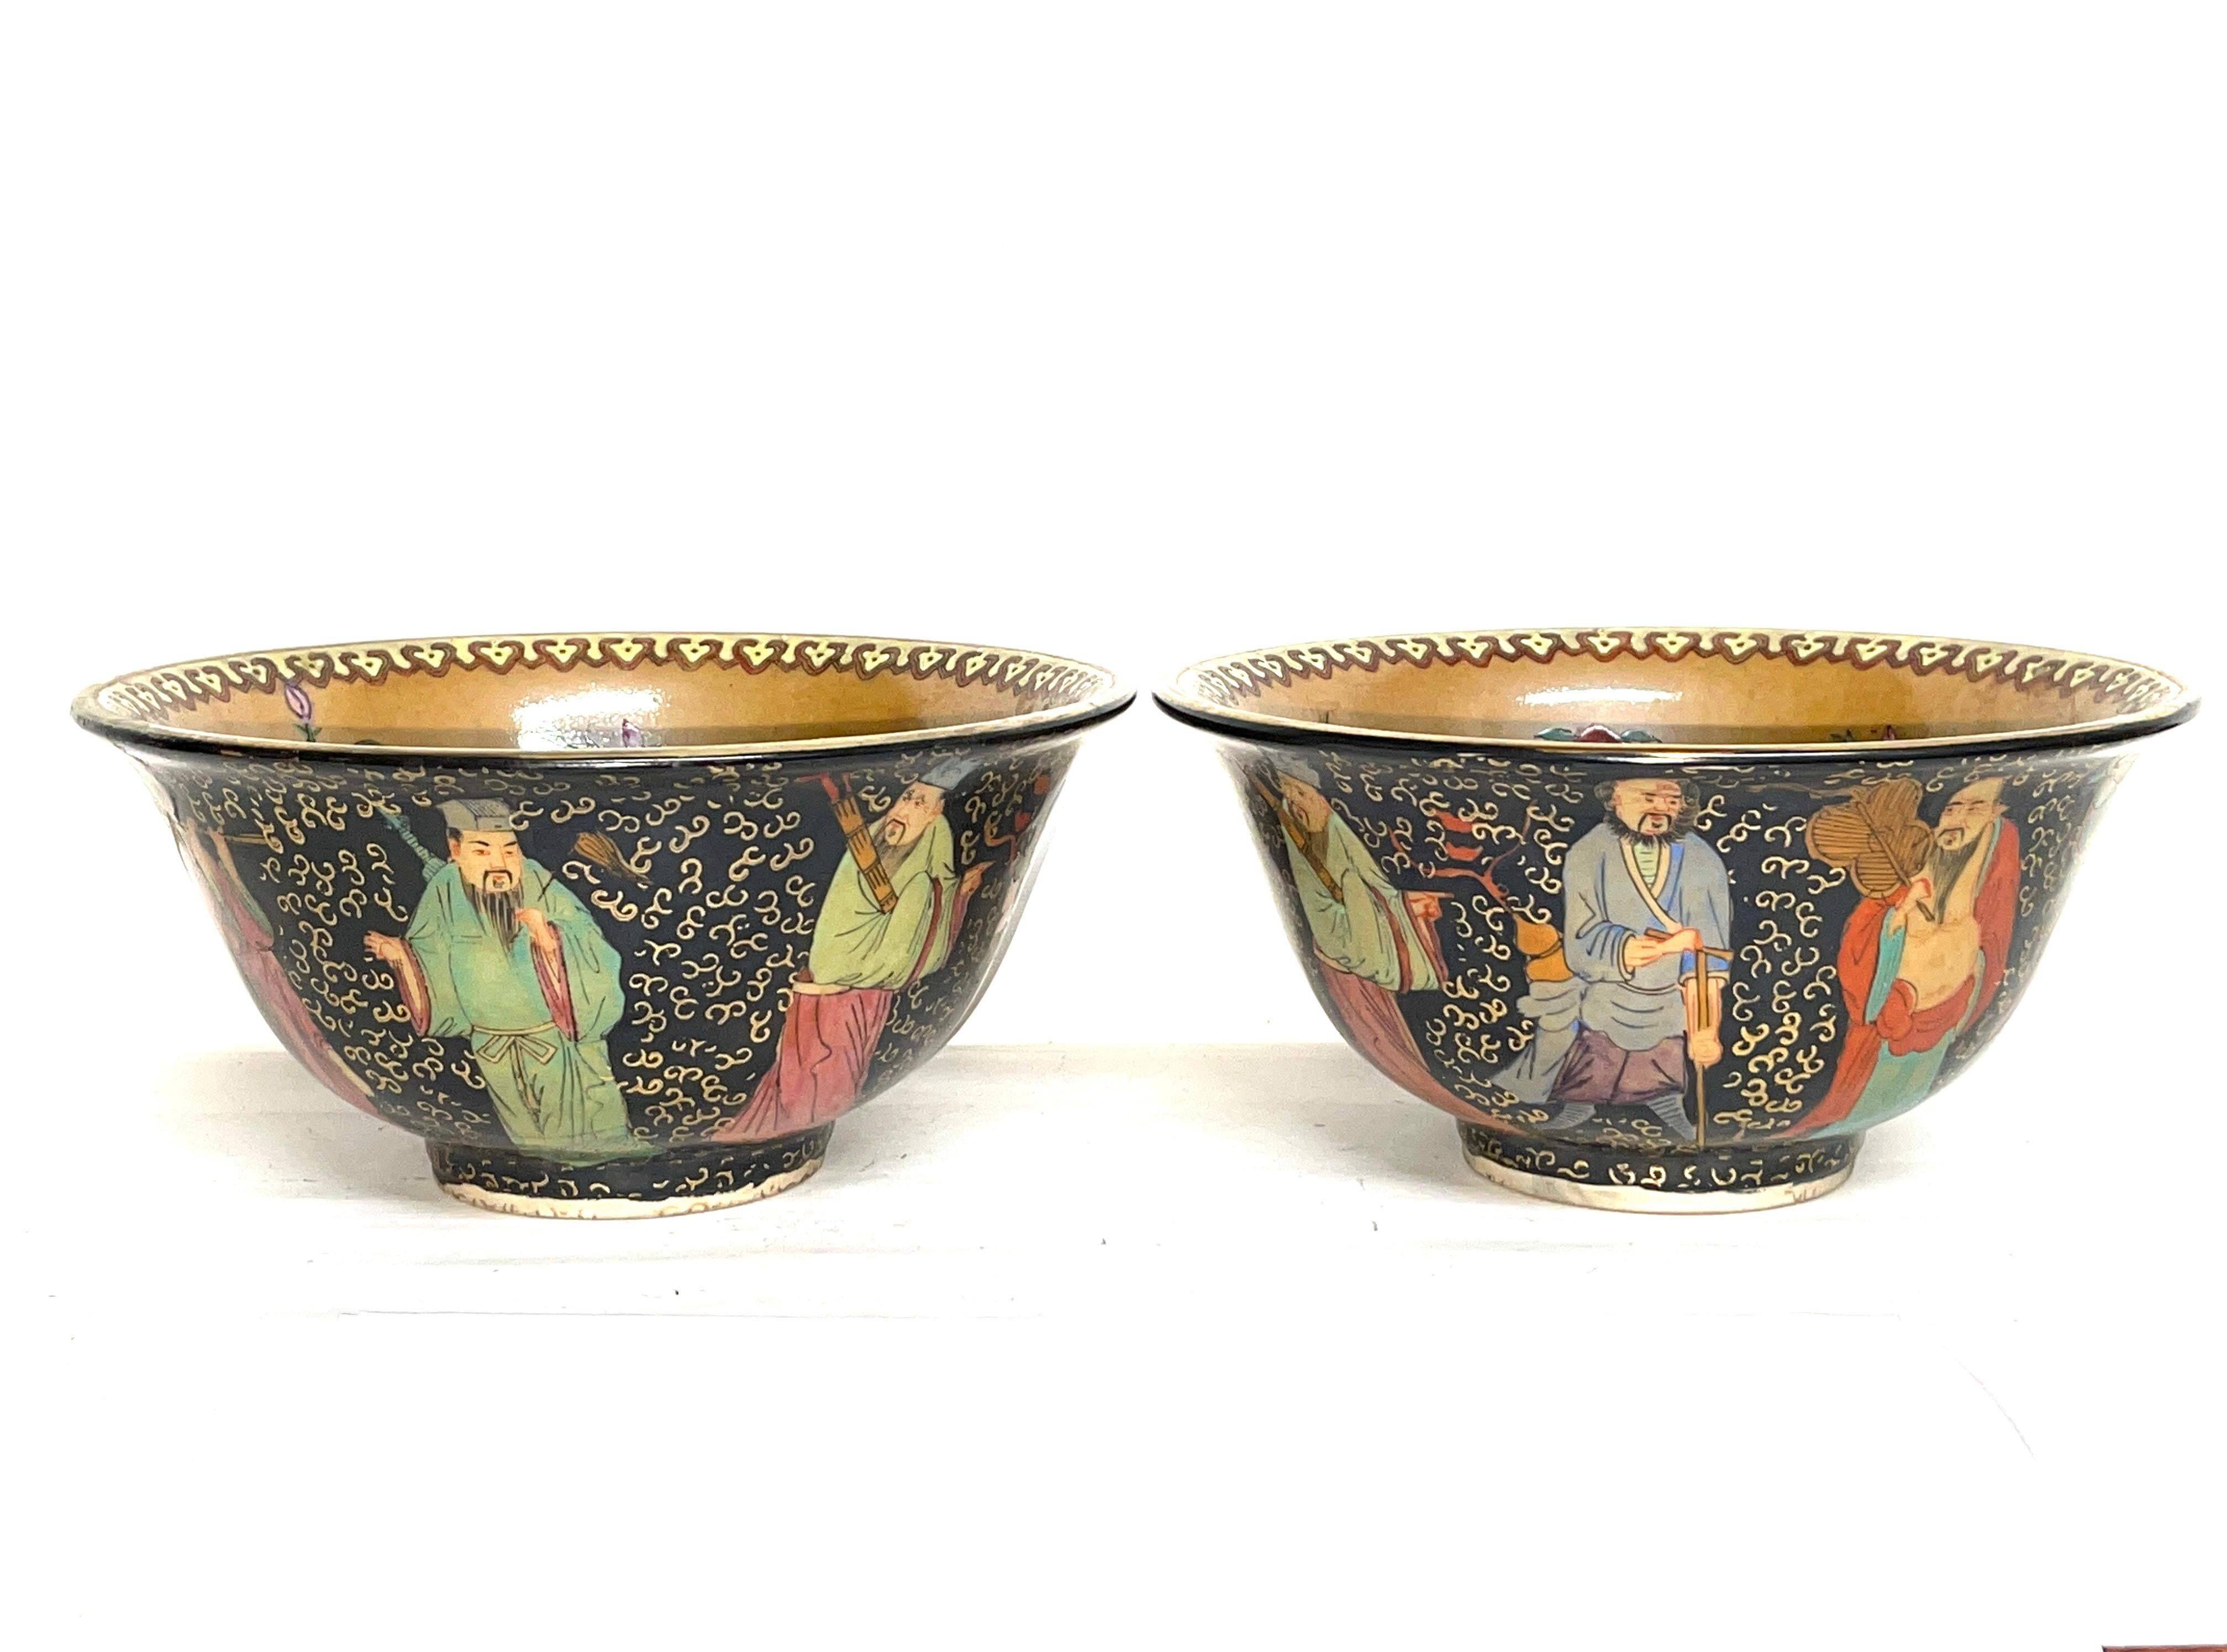 Pair of Antique Chinese Ceramic Bowls, 20th Century, Asian Art For Sale 1